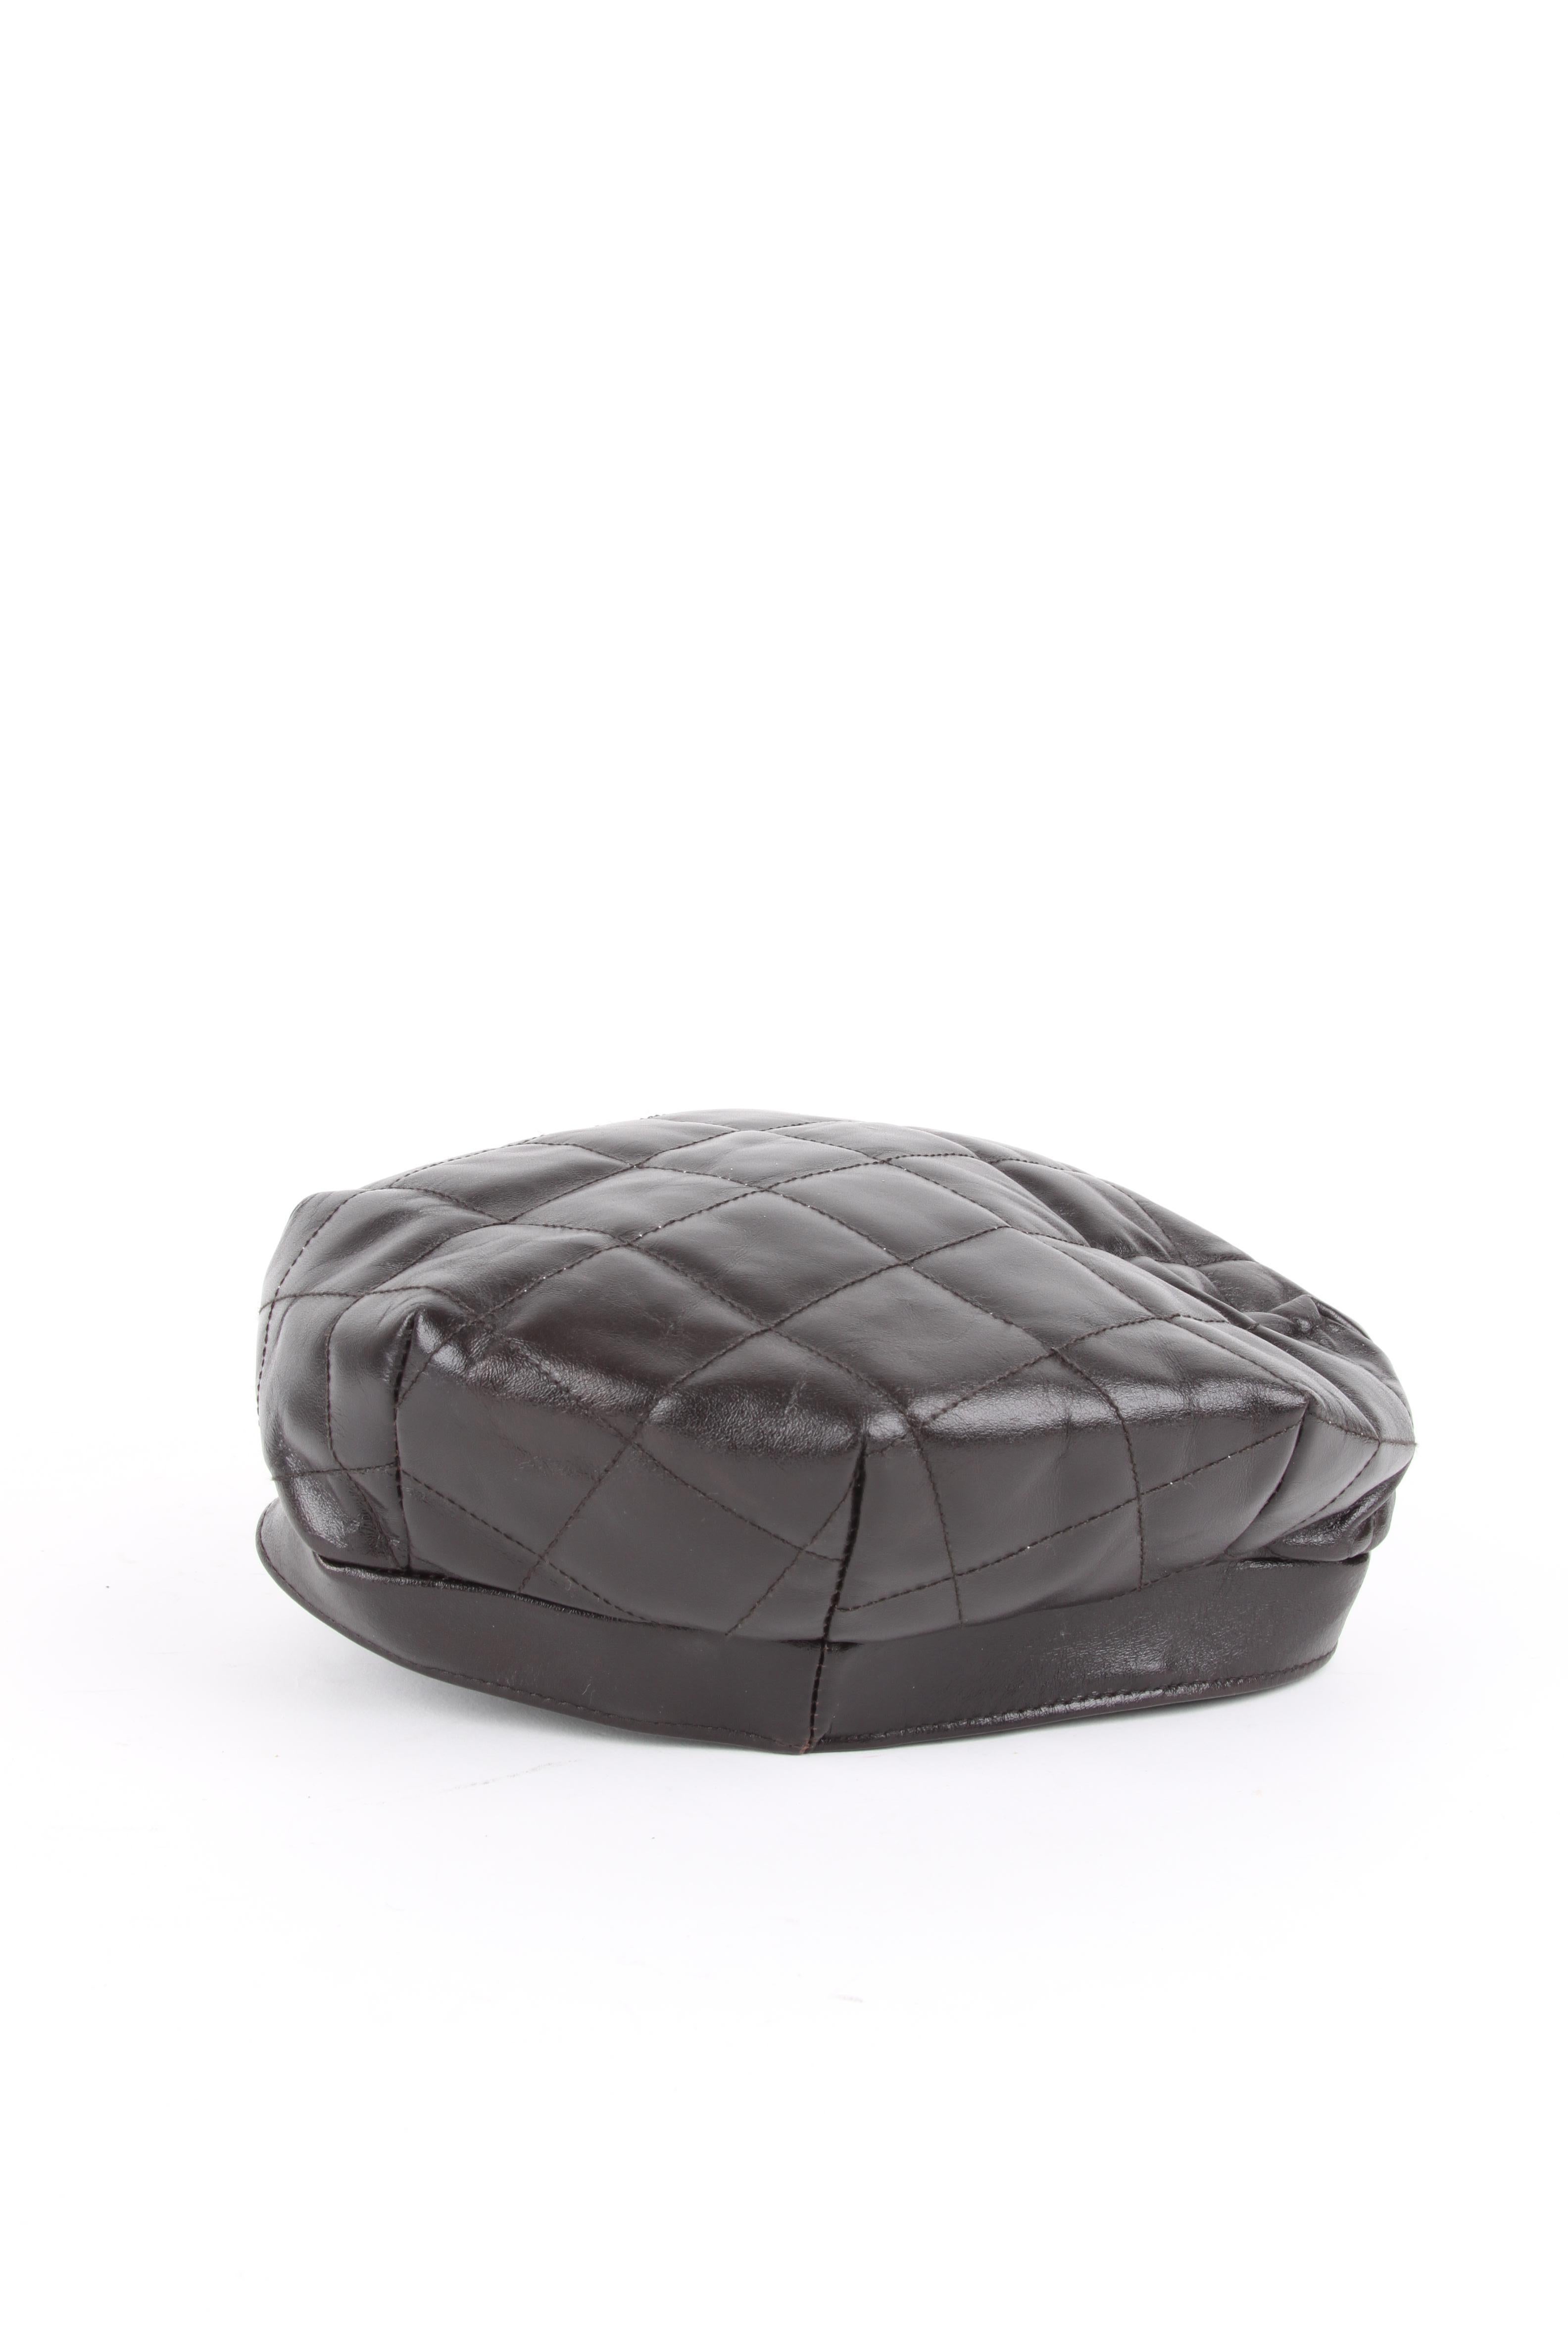 Black Burberry Leather Hat For Sale